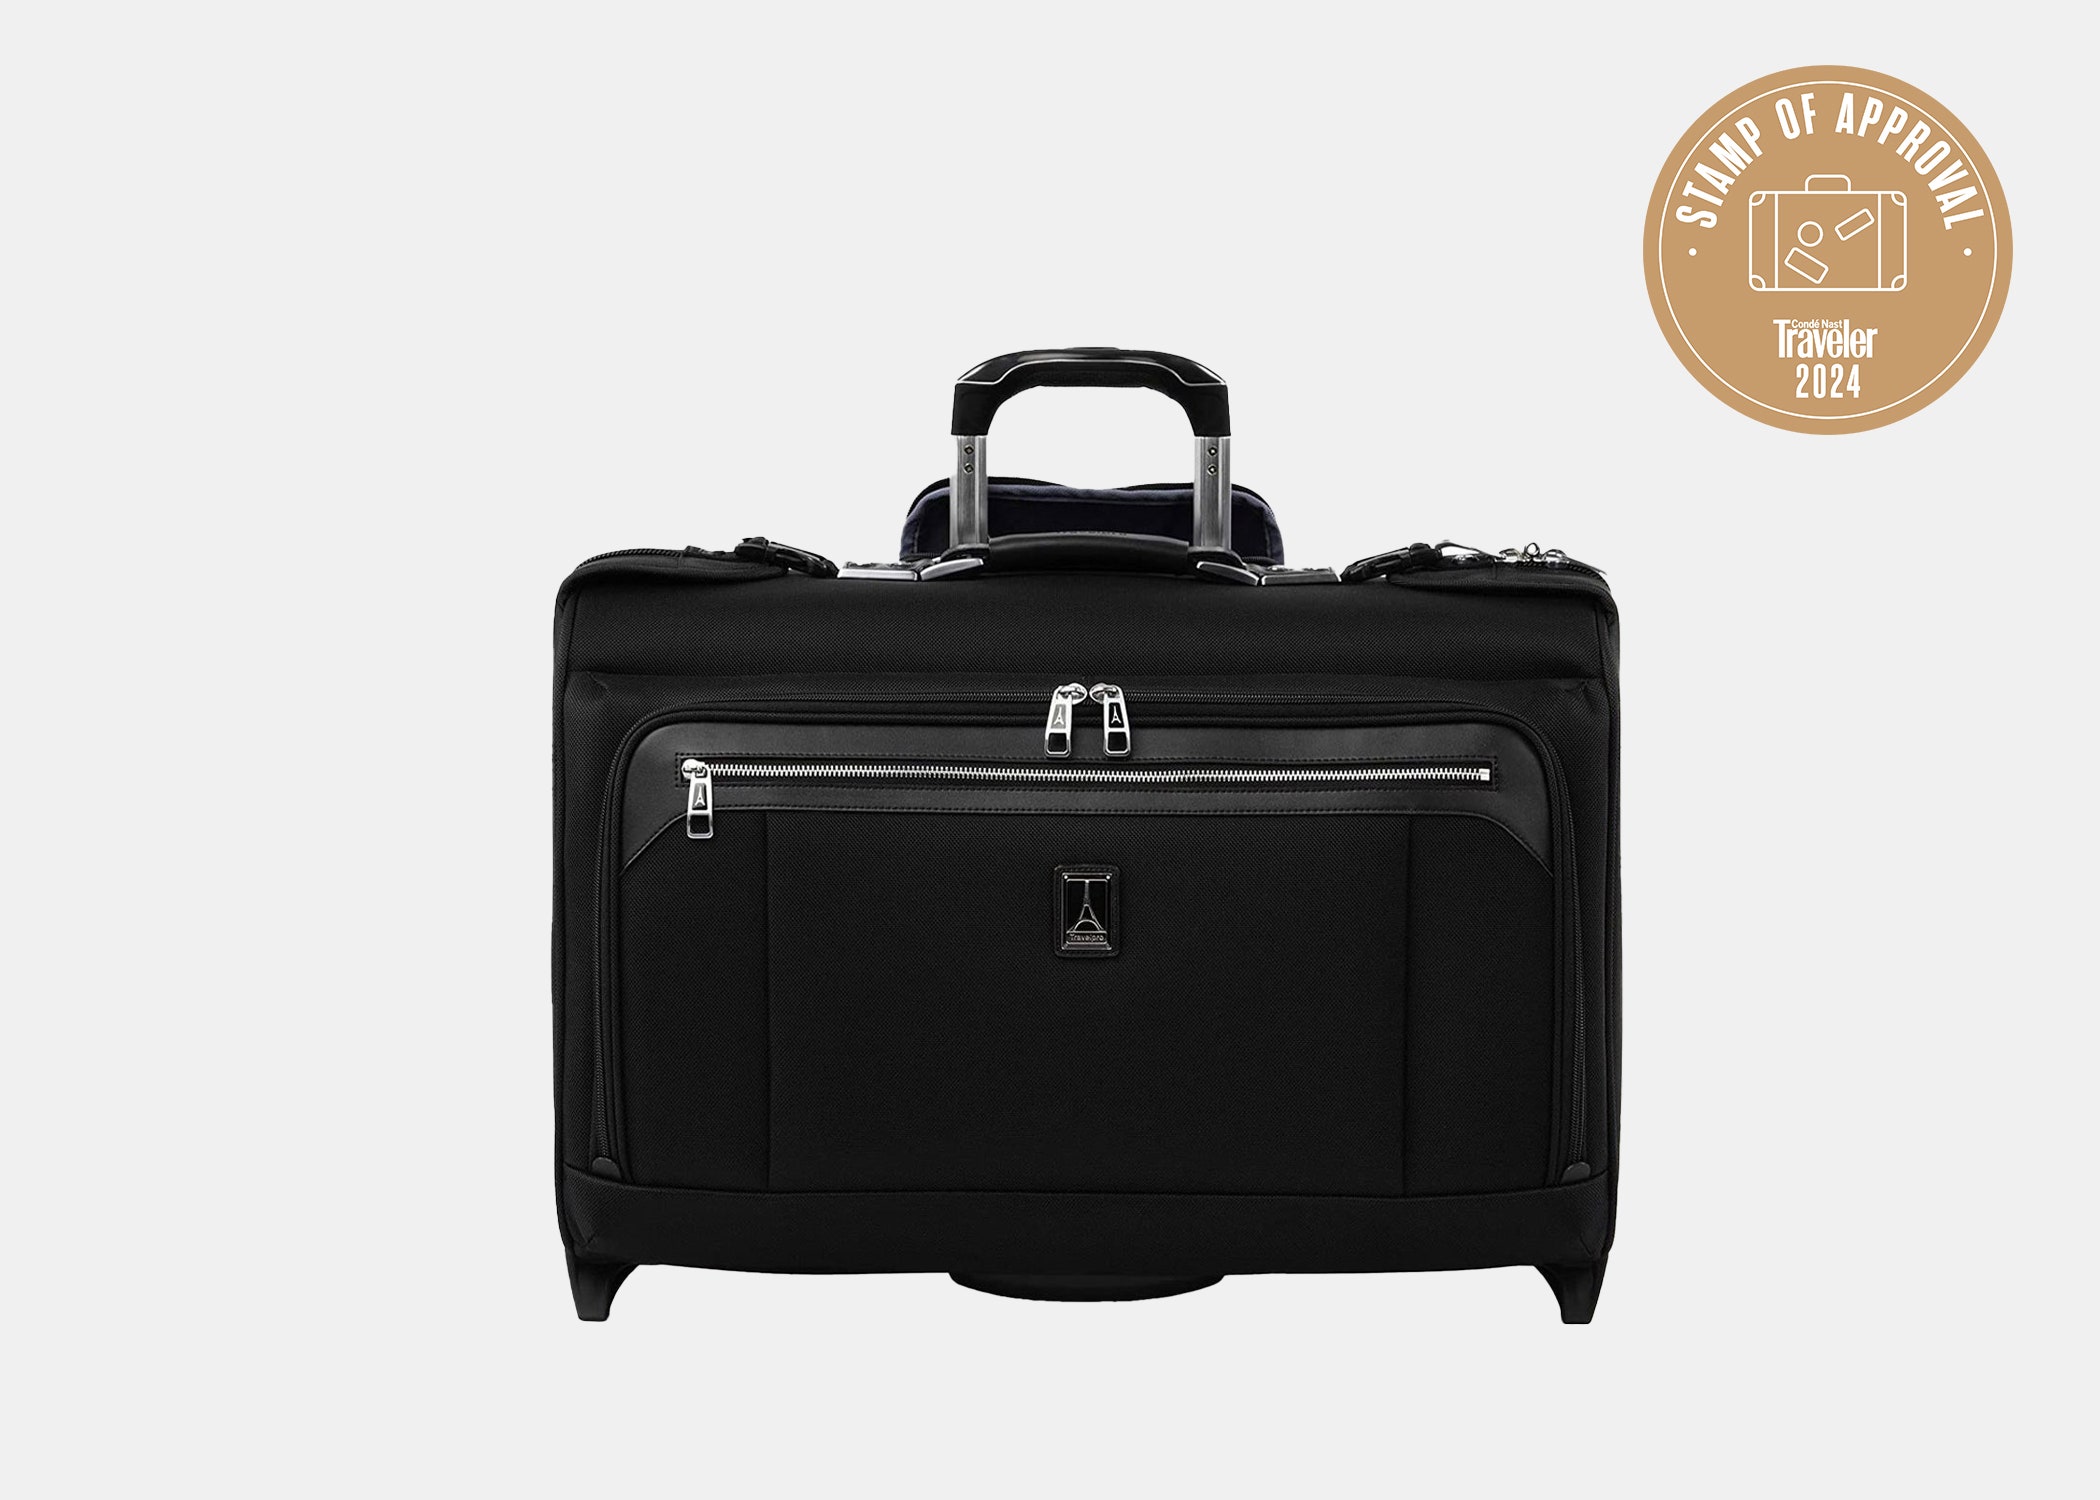 <p><strong>Best rolling garment bag</strong></p> <p>It looks like a small carry-on, but it's actually a garment bag on wheels. <a href="https://www.cntraveler.com/contributor/lara-kramer?mbid=synd_msn_rss&utm_source=msn&utm_medium=syndication">Lara Kramer</a>, <em>Traveler's</em> former global associate director of audience development, used this rolling garment carry-on for her honeymoon in Italy, Croatia, and Montenegro a few summers ago. While smaller than an average carry-on, Kramer told us it holds way more than you think. “I was able to pack a few nice dresses and my husband fit an entire suit, all of which remained wrinkle-free, which was a game changer,” she says. Kramer also loves that when you purchase this bag, it comes with a plan that covers the cost of repairs or damage from airlines for up to one year, including shipping costs. “Yes, this bag glides seamlessly through airports and is incredibly durable thanks to its nylon fabric with Duraguard coating, but the lay-flat garment bag design is the real gem of this carry-on," says Kramer.</p> <p><strong>Dimensions</strong>: 14" x 22" x 9.5"<br> <strong>Weight:</strong> 9.9 lbs.</p> $380, Amazon. <a href="https://www.amazon.com/Travelpro-Luggage-Platinum-Rolling-Suitcase/dp/B07DL69FGR">Get it now!</a><p>Sign up to receive the latest news, expert tips, and inspiration on all things travel</p><a href="https://www.cntraveler.com/newsletter/the-daily?sourceCode=msnsend">Inspire Me</a>